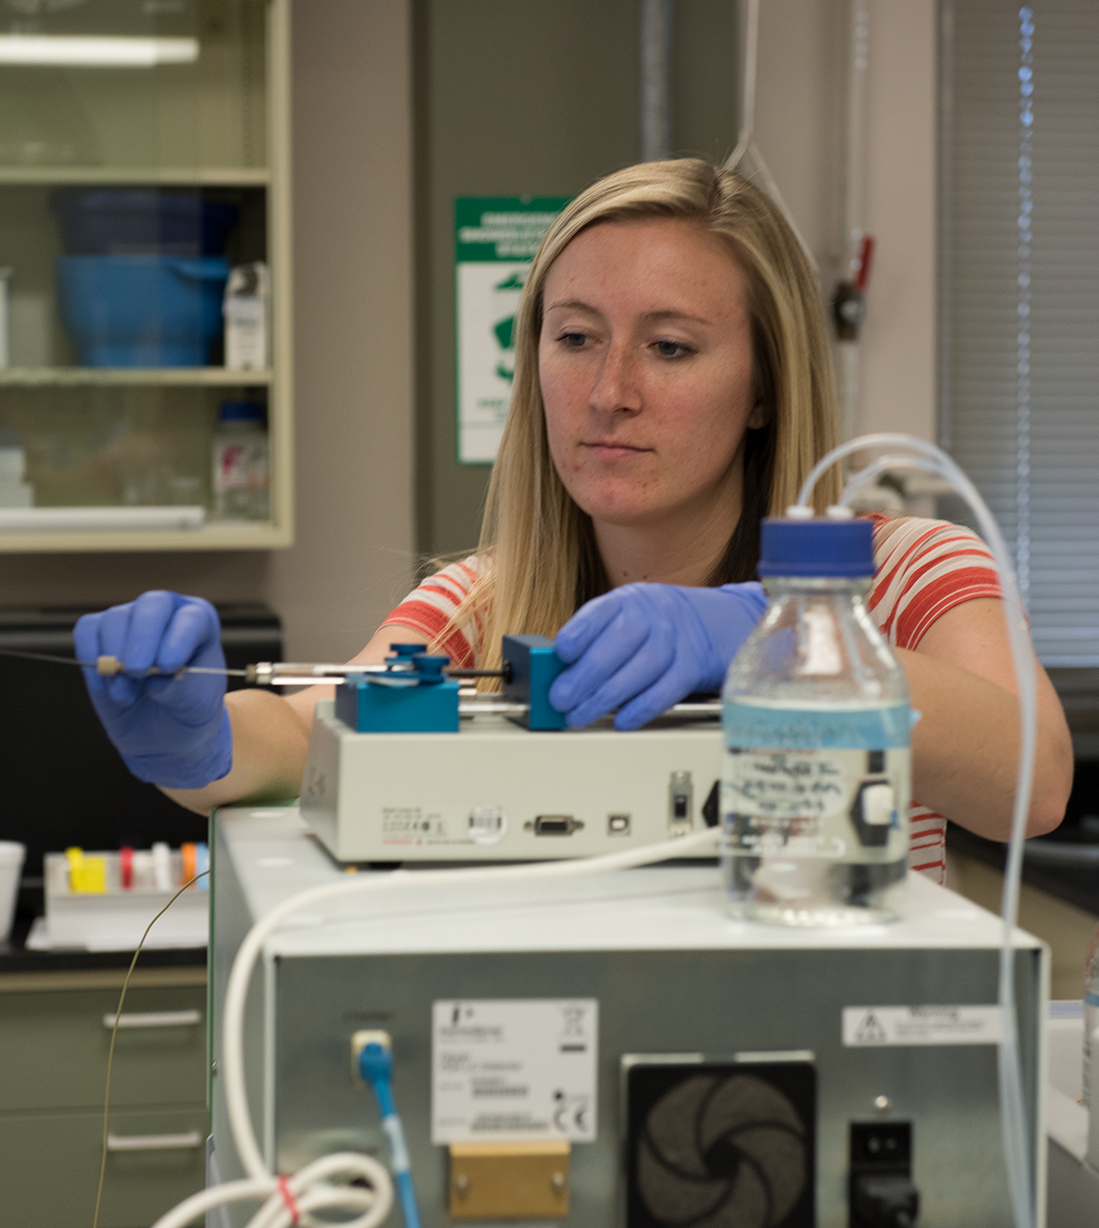 Brianna Mackie has completed her graduate program in Medicinal Chemistry